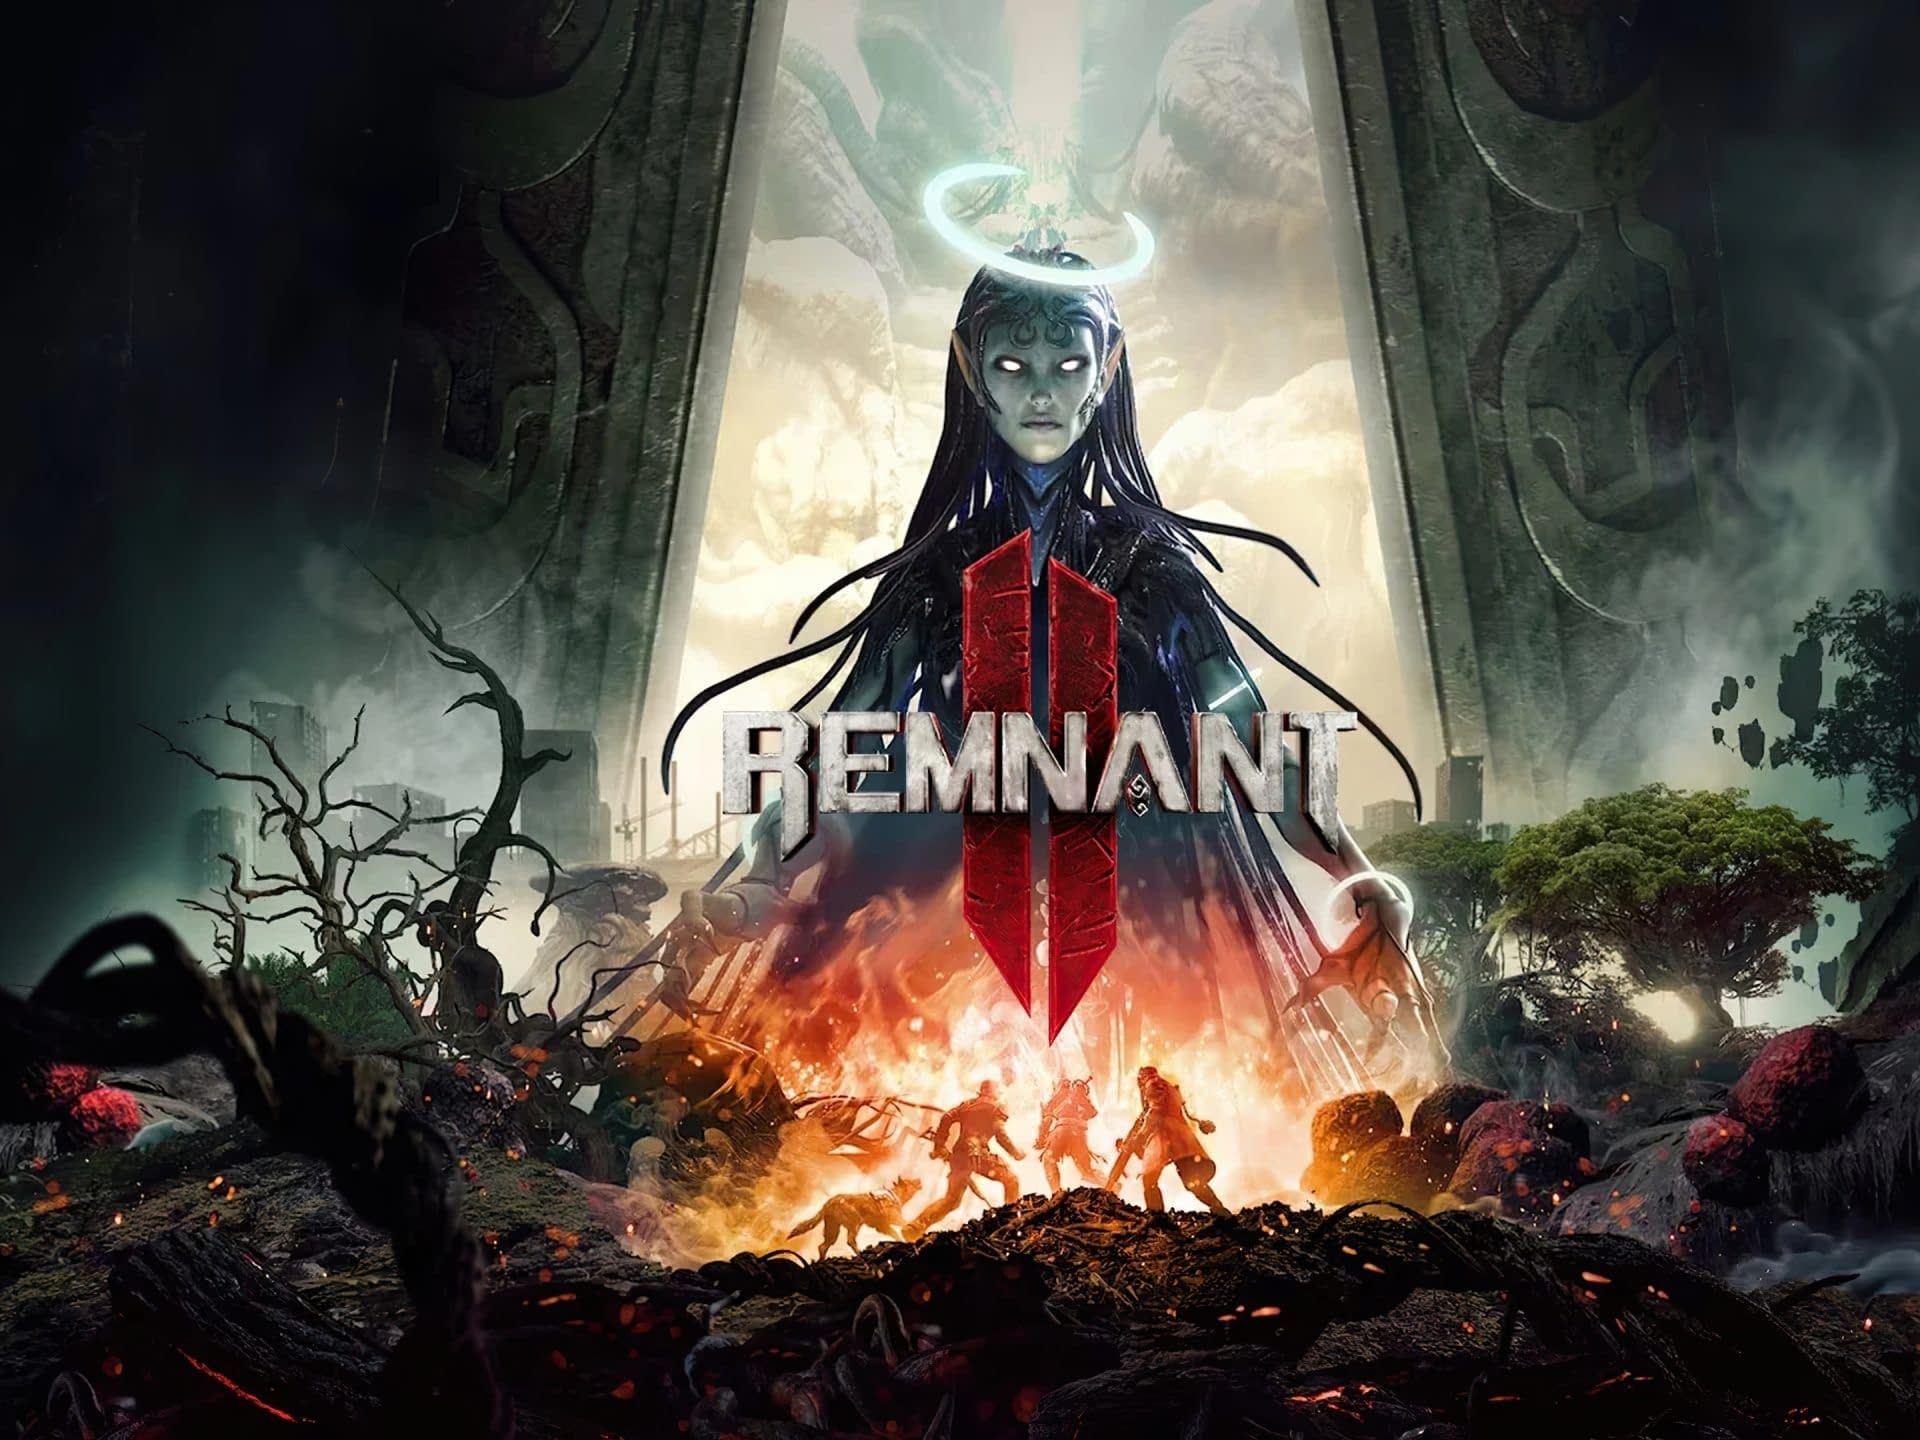 New DLC Announcement for Remnant 2: Release Date Announced